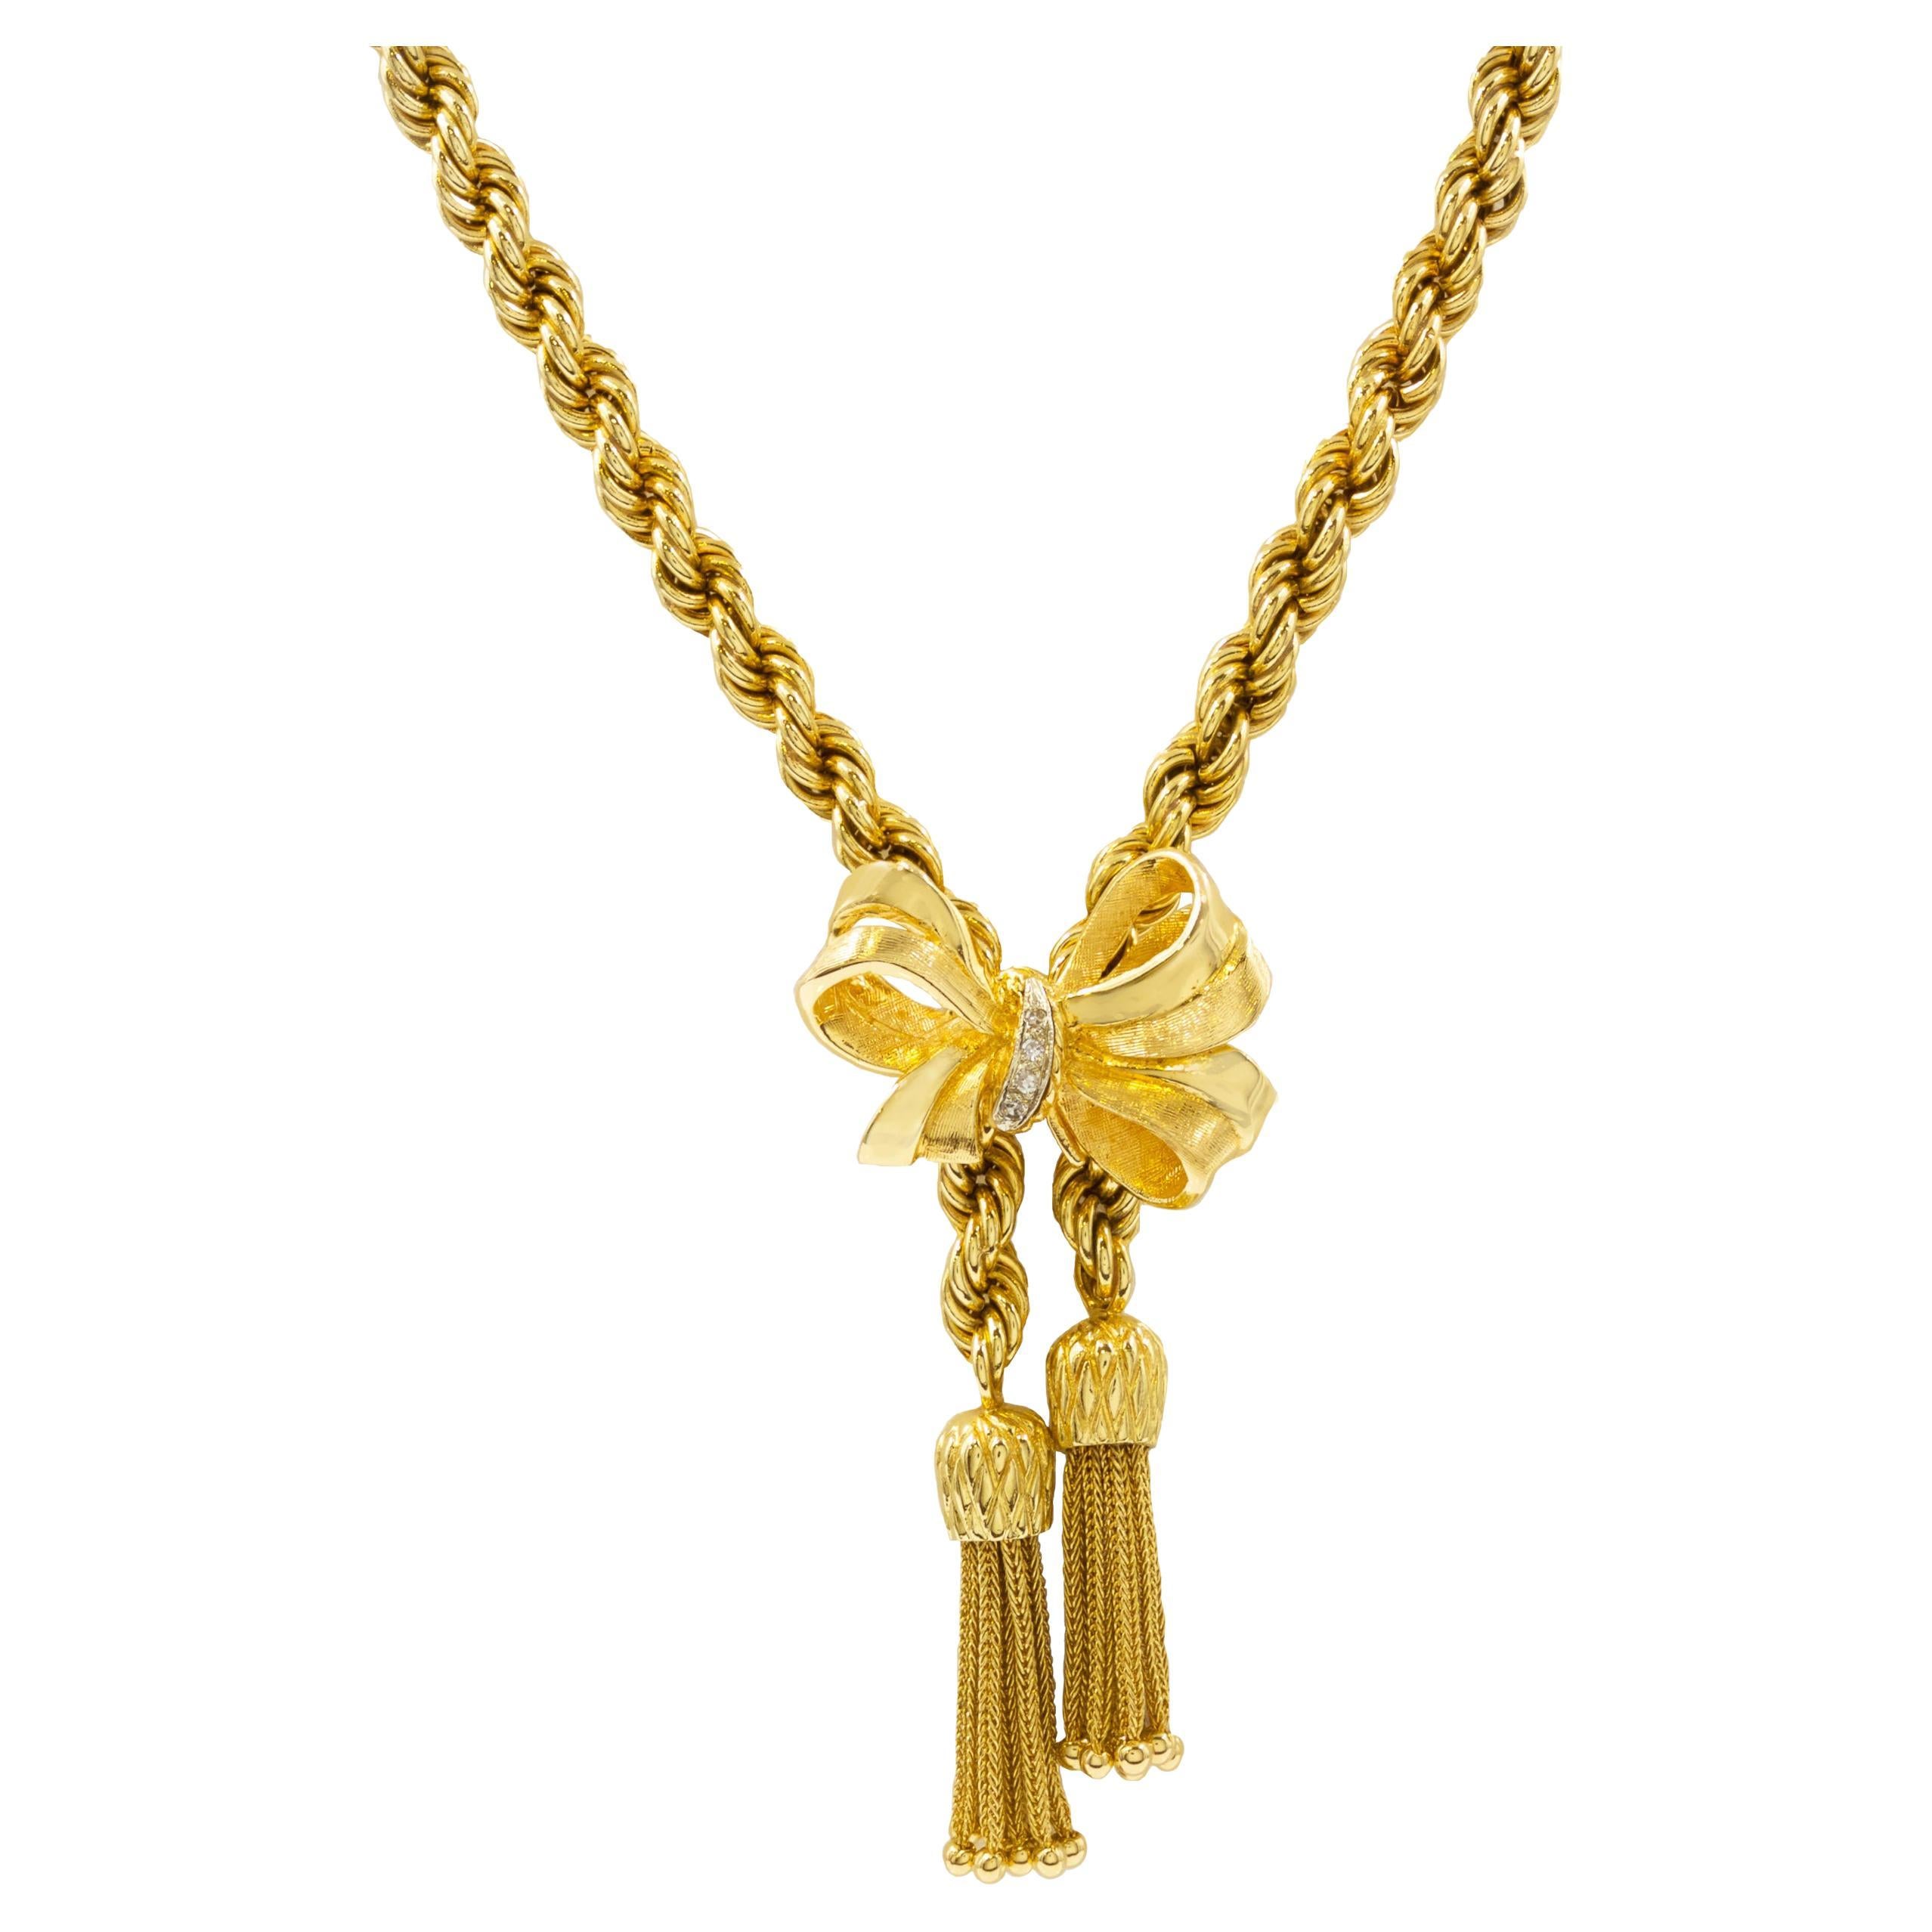 Vintage 14k Gold Rope Chain Necklace with Lariat-Style Bow & Tassels